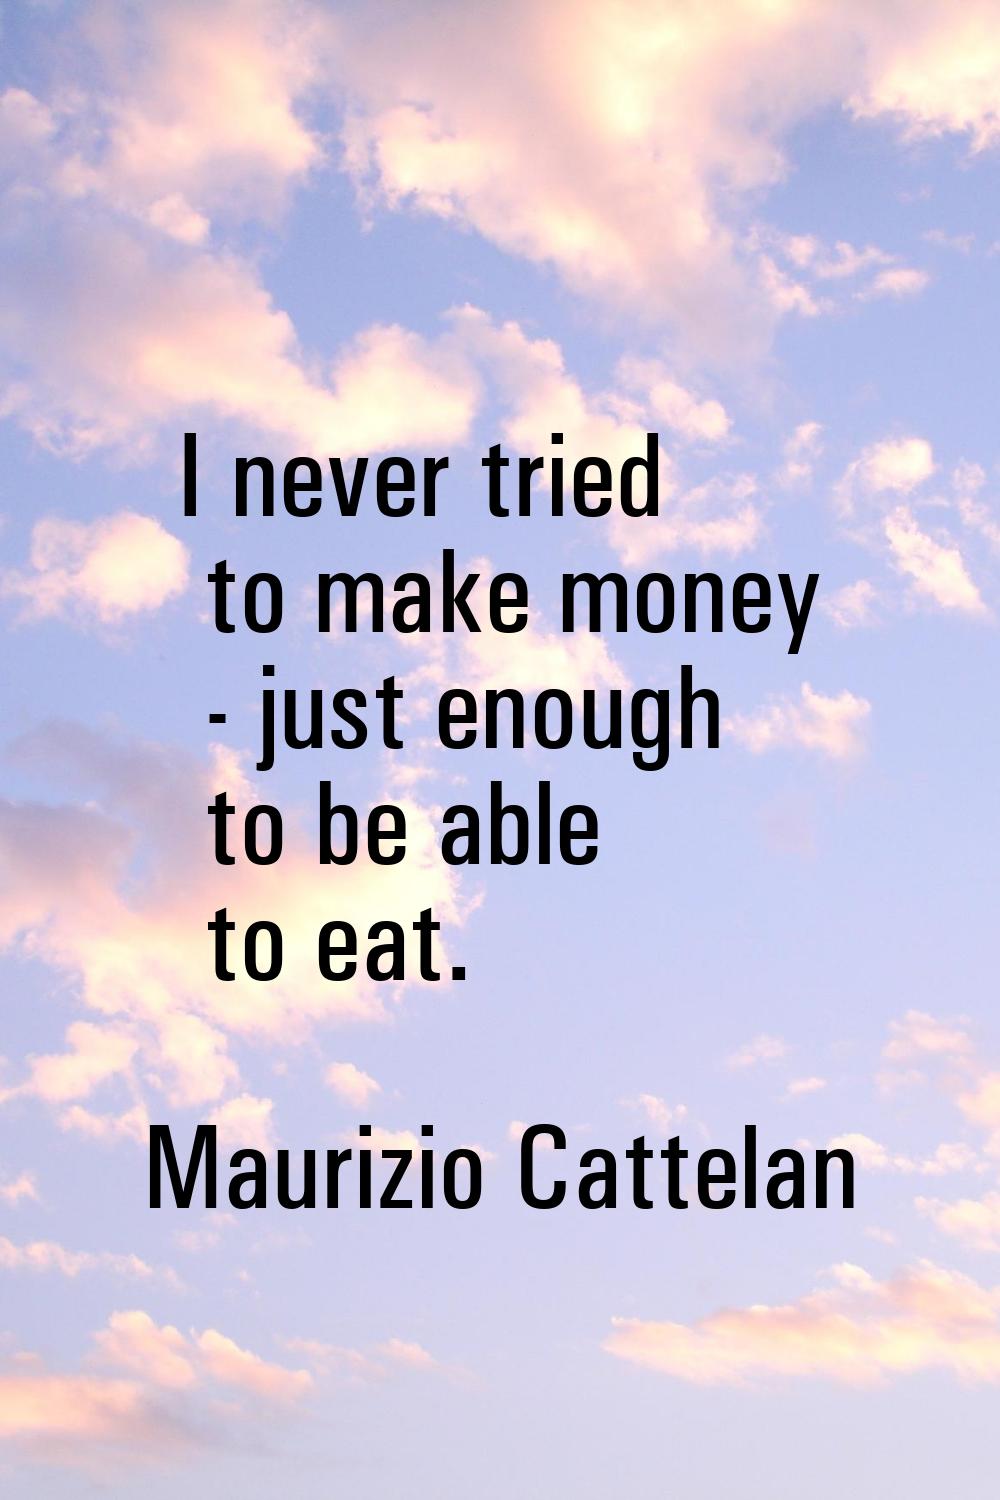 I never tried to make money - just enough to be able to eat.